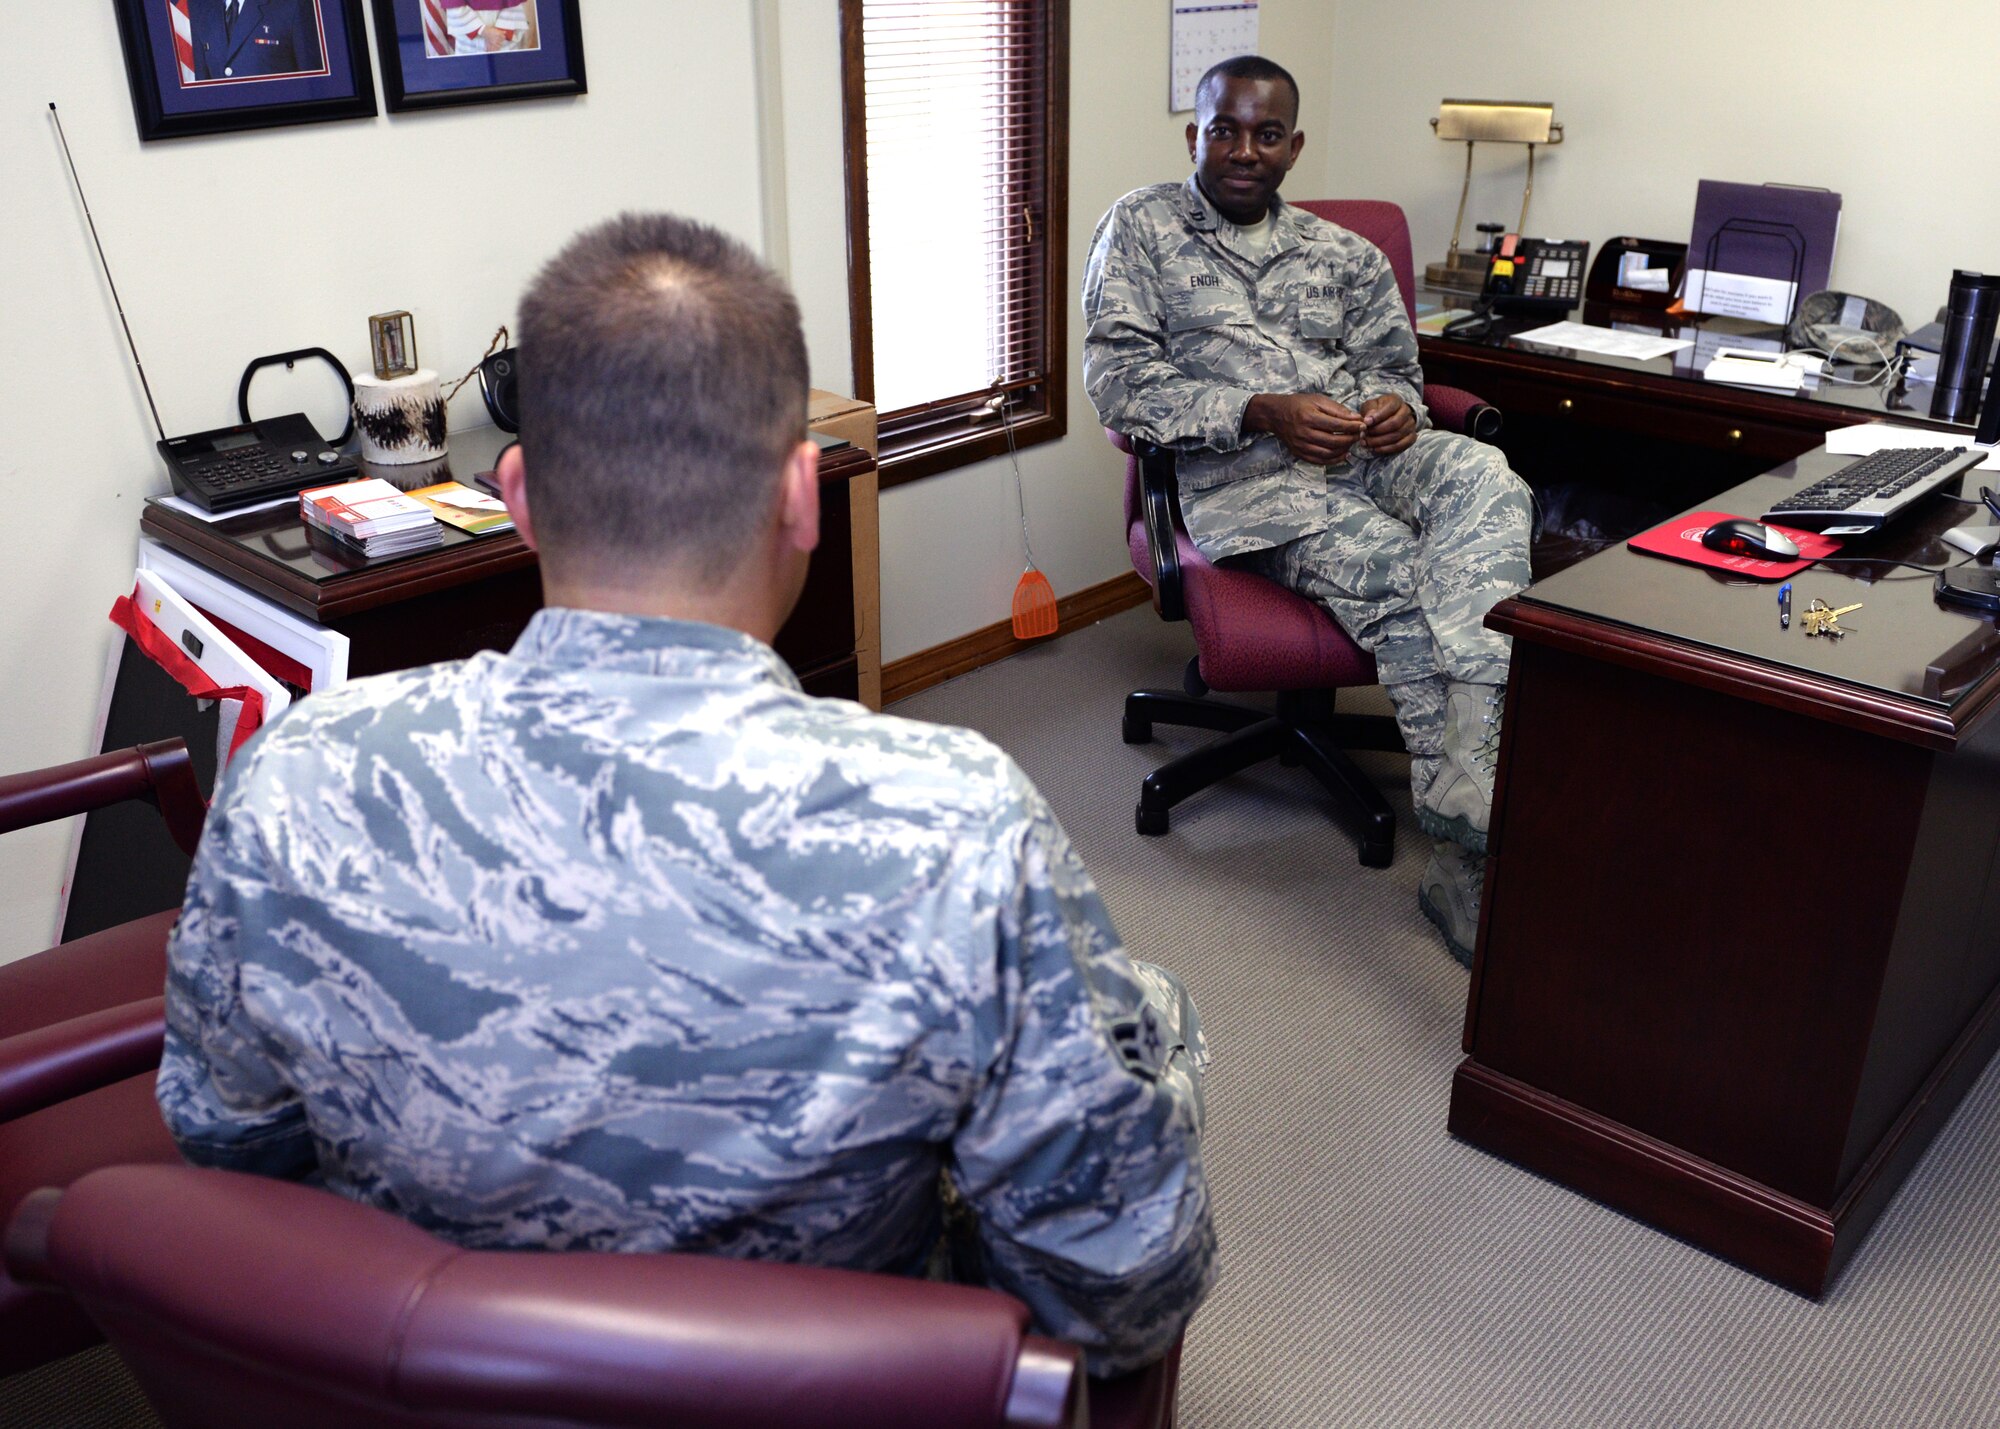 ALTUS AIR FORCE BASE, Okla. – U.S. Air Force 1st Lt. Emmanuel Enoh, 97th Air Mobility Wing chaplain, speaks with an Airman during a confidential counseling session at the chapel, May 7, 2015. Chaplains maintain a presence with the Airmen on base in a variety of ways, such as spiritual resilience retreats and base events, counseling services and squadron visits. (U.S. Air Force photo by Airman 1st Class Megan E. Acs/Released)